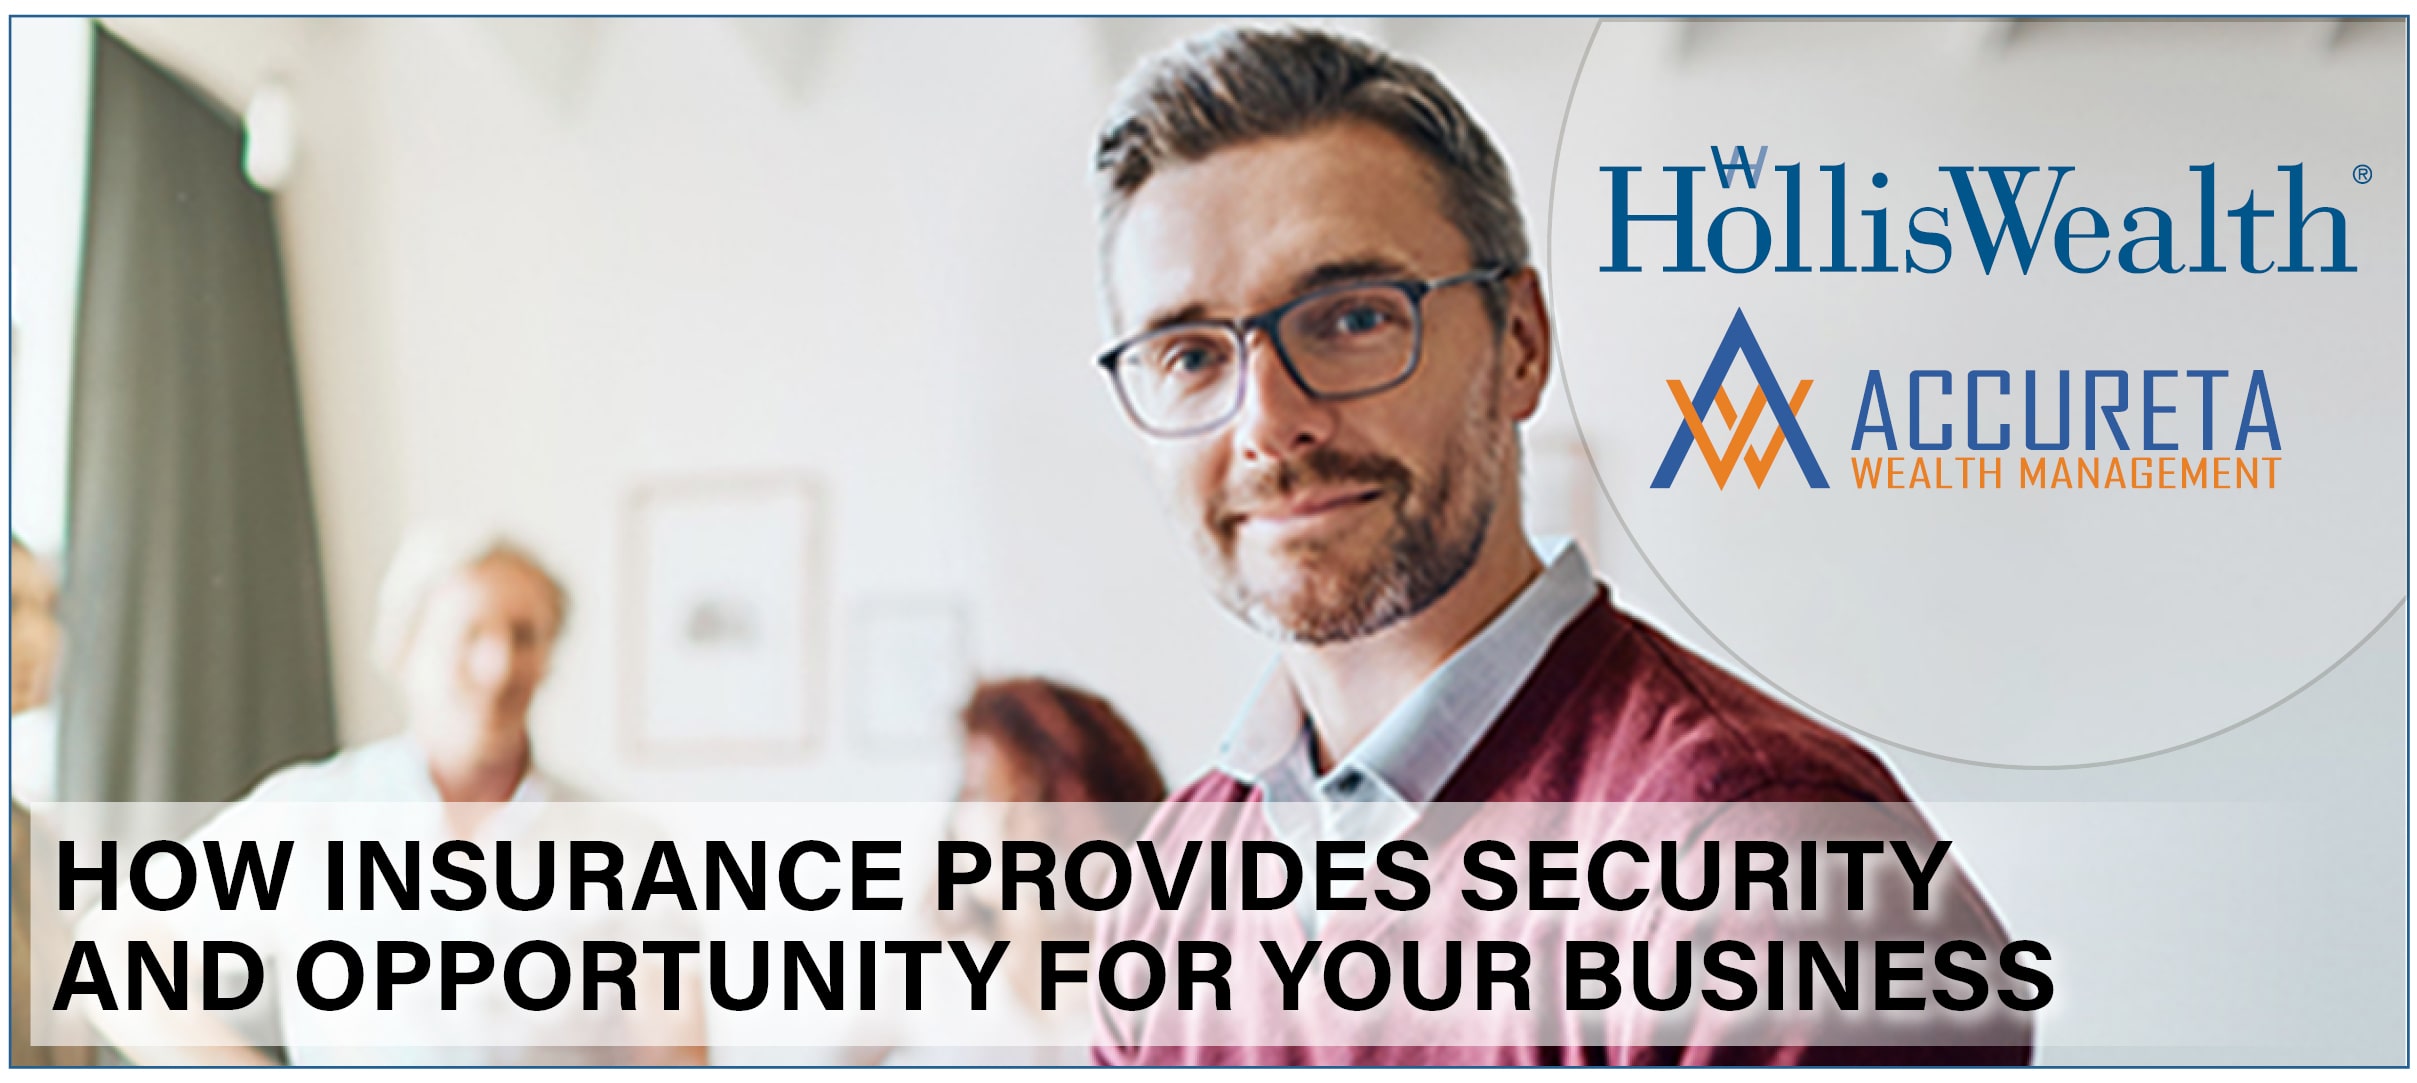 How Insurance Provides Security and Opportunity for your Business - Software Testing